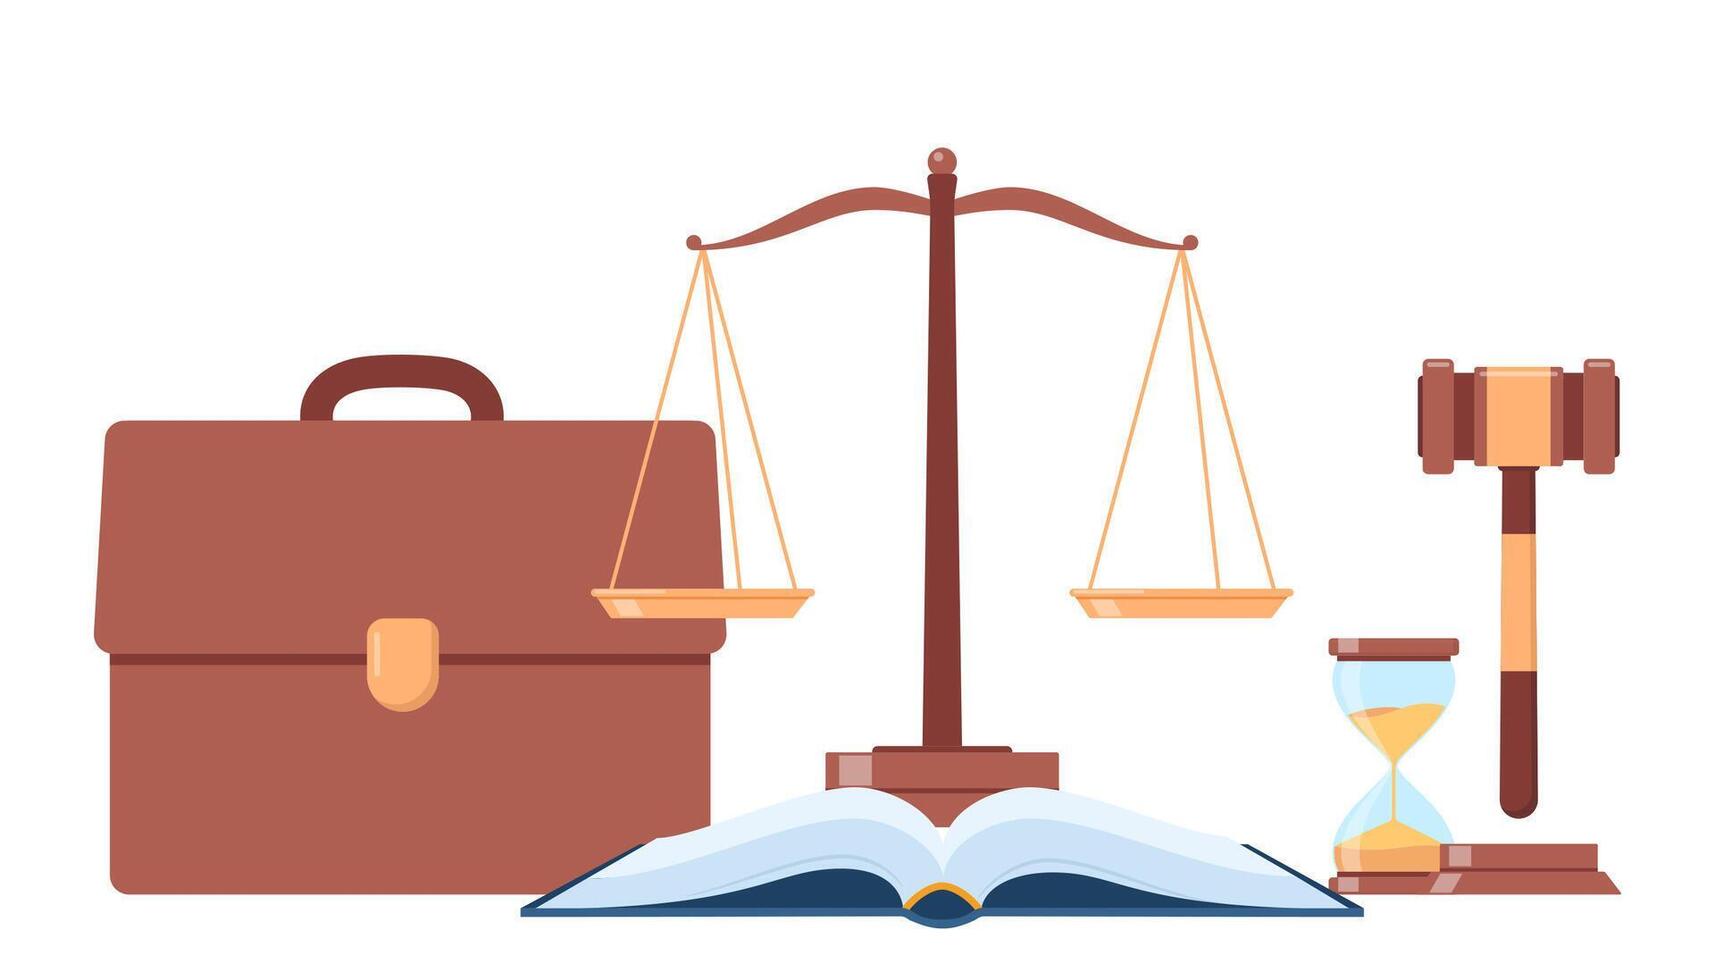 Symbols of justice. Law book, judicial gavel, weights of justice, courthouse, briefcase. Vector illustration.